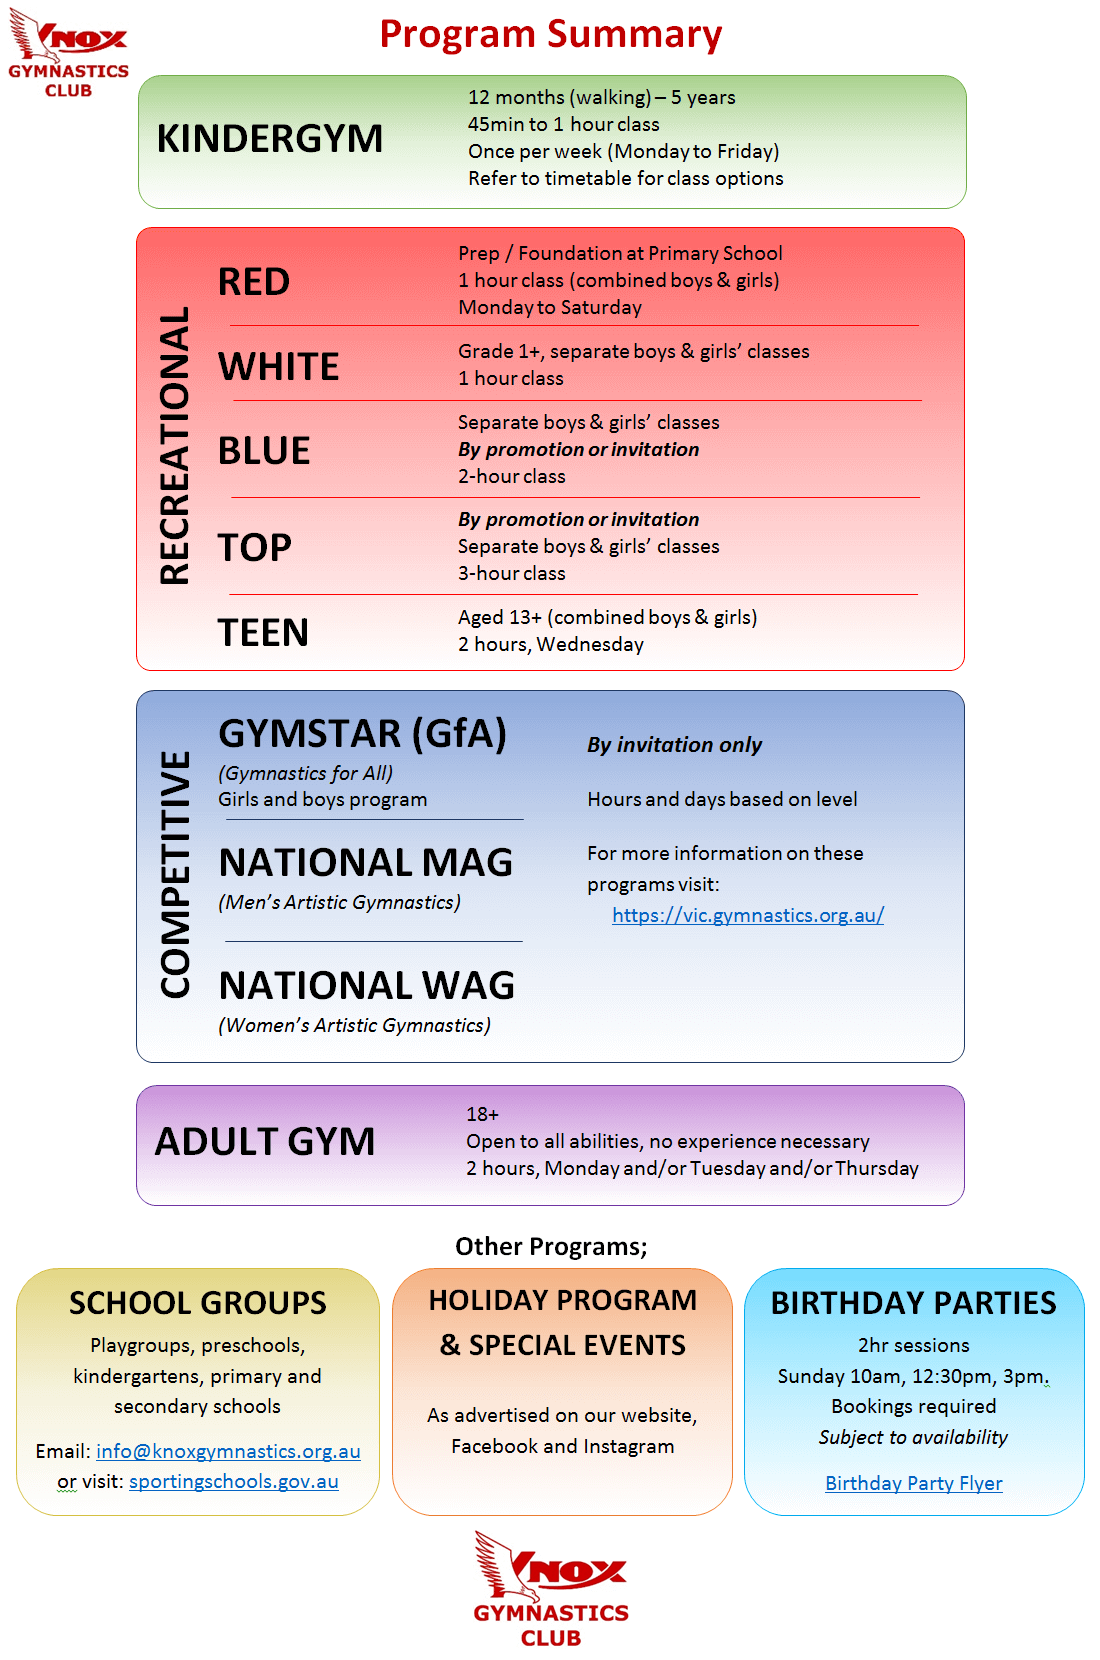 Knox Gymnastics Club - Layout of classes and other programs we offer